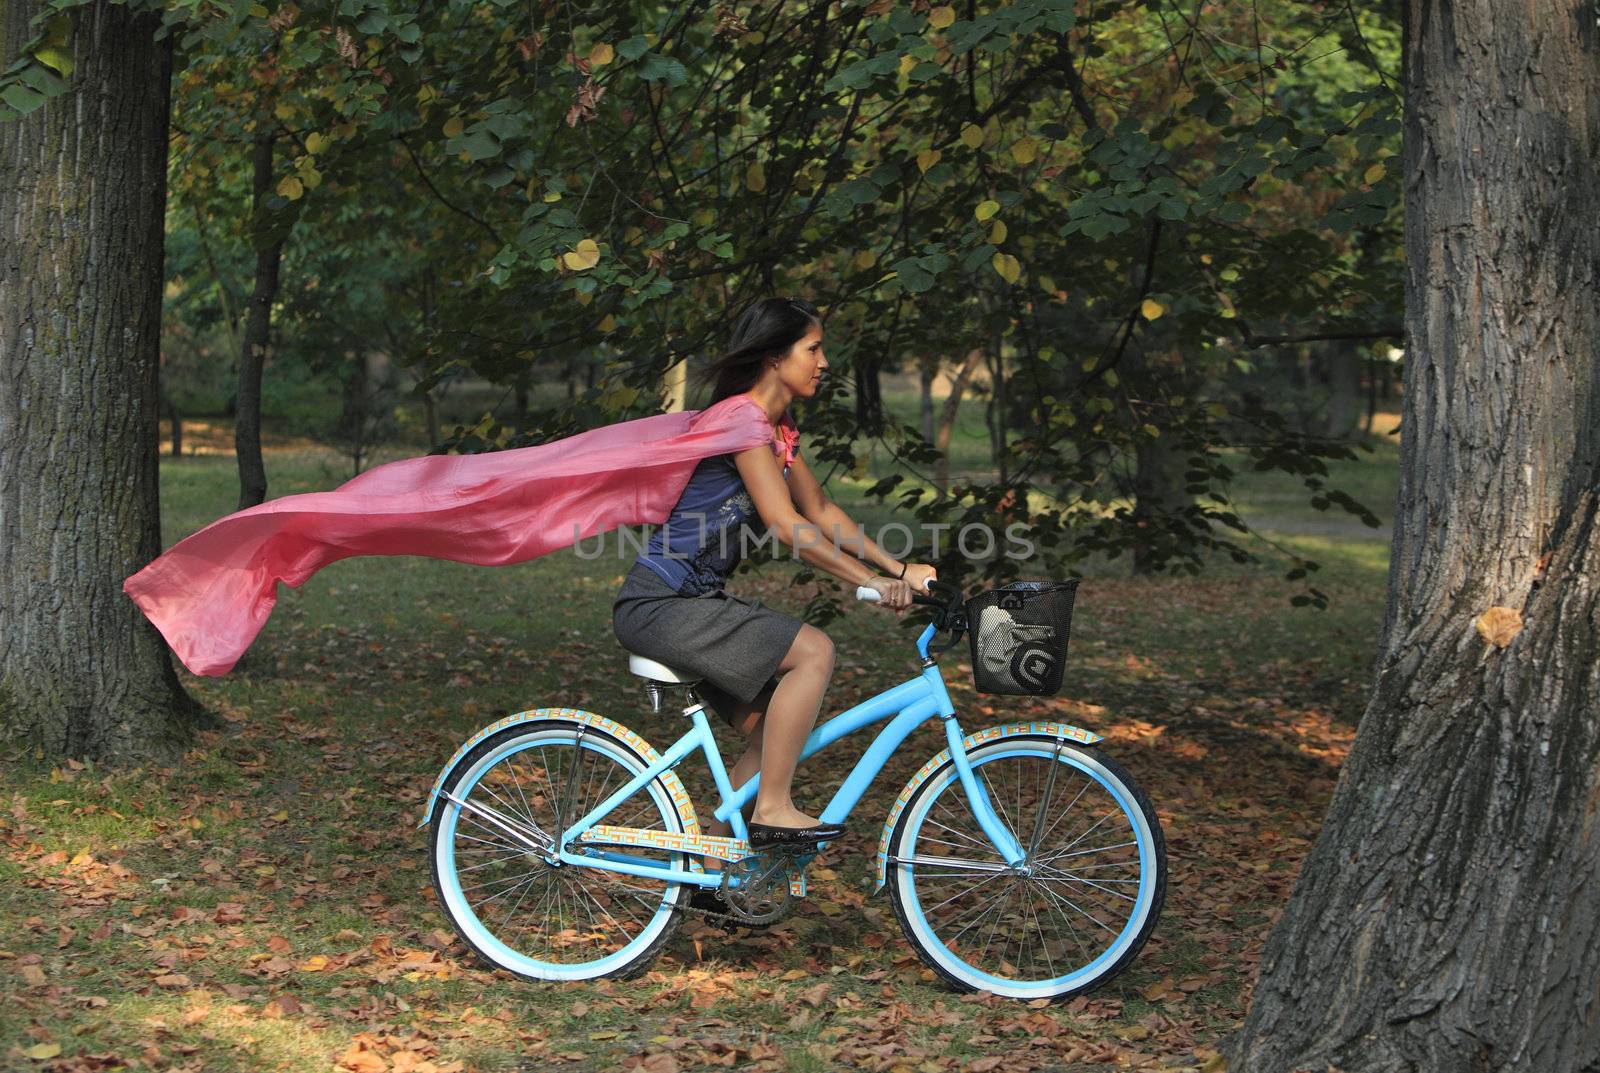 Image of a happy young woman with a pink scarf riding a bicycle in an early autumn park.